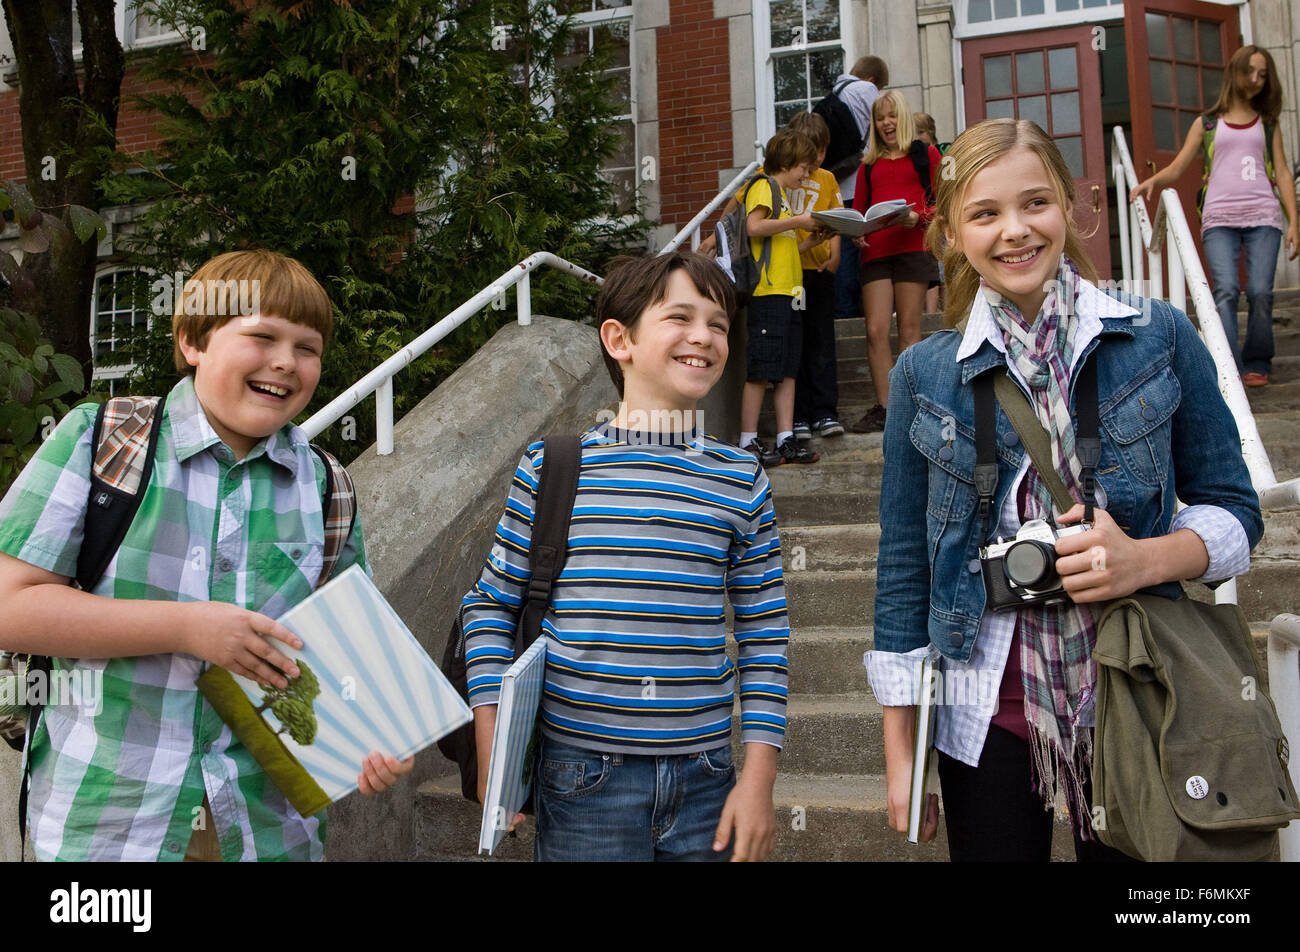 RELEASE DATE: March 19, 2010. MOVIE TITLE: Diary of a Wimpy Kid